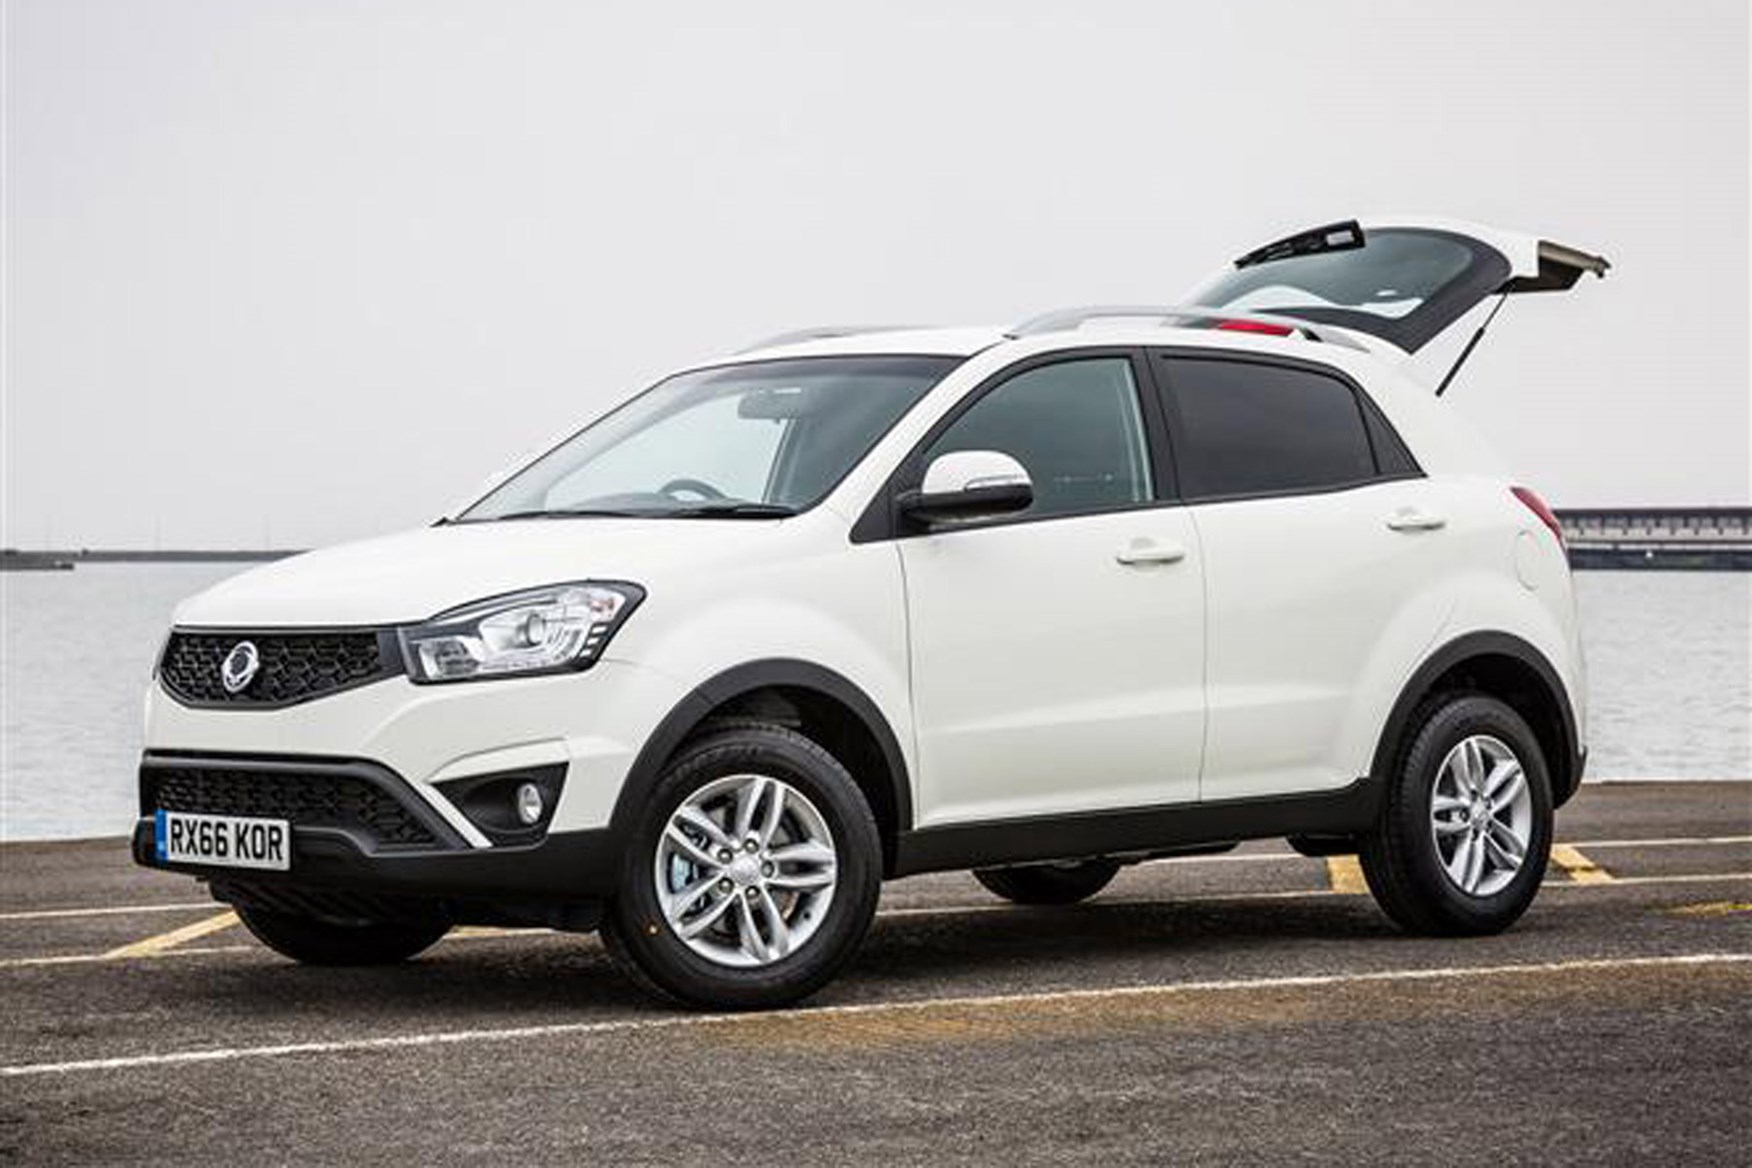 SsangYong Korando review on Parkers Vans - front